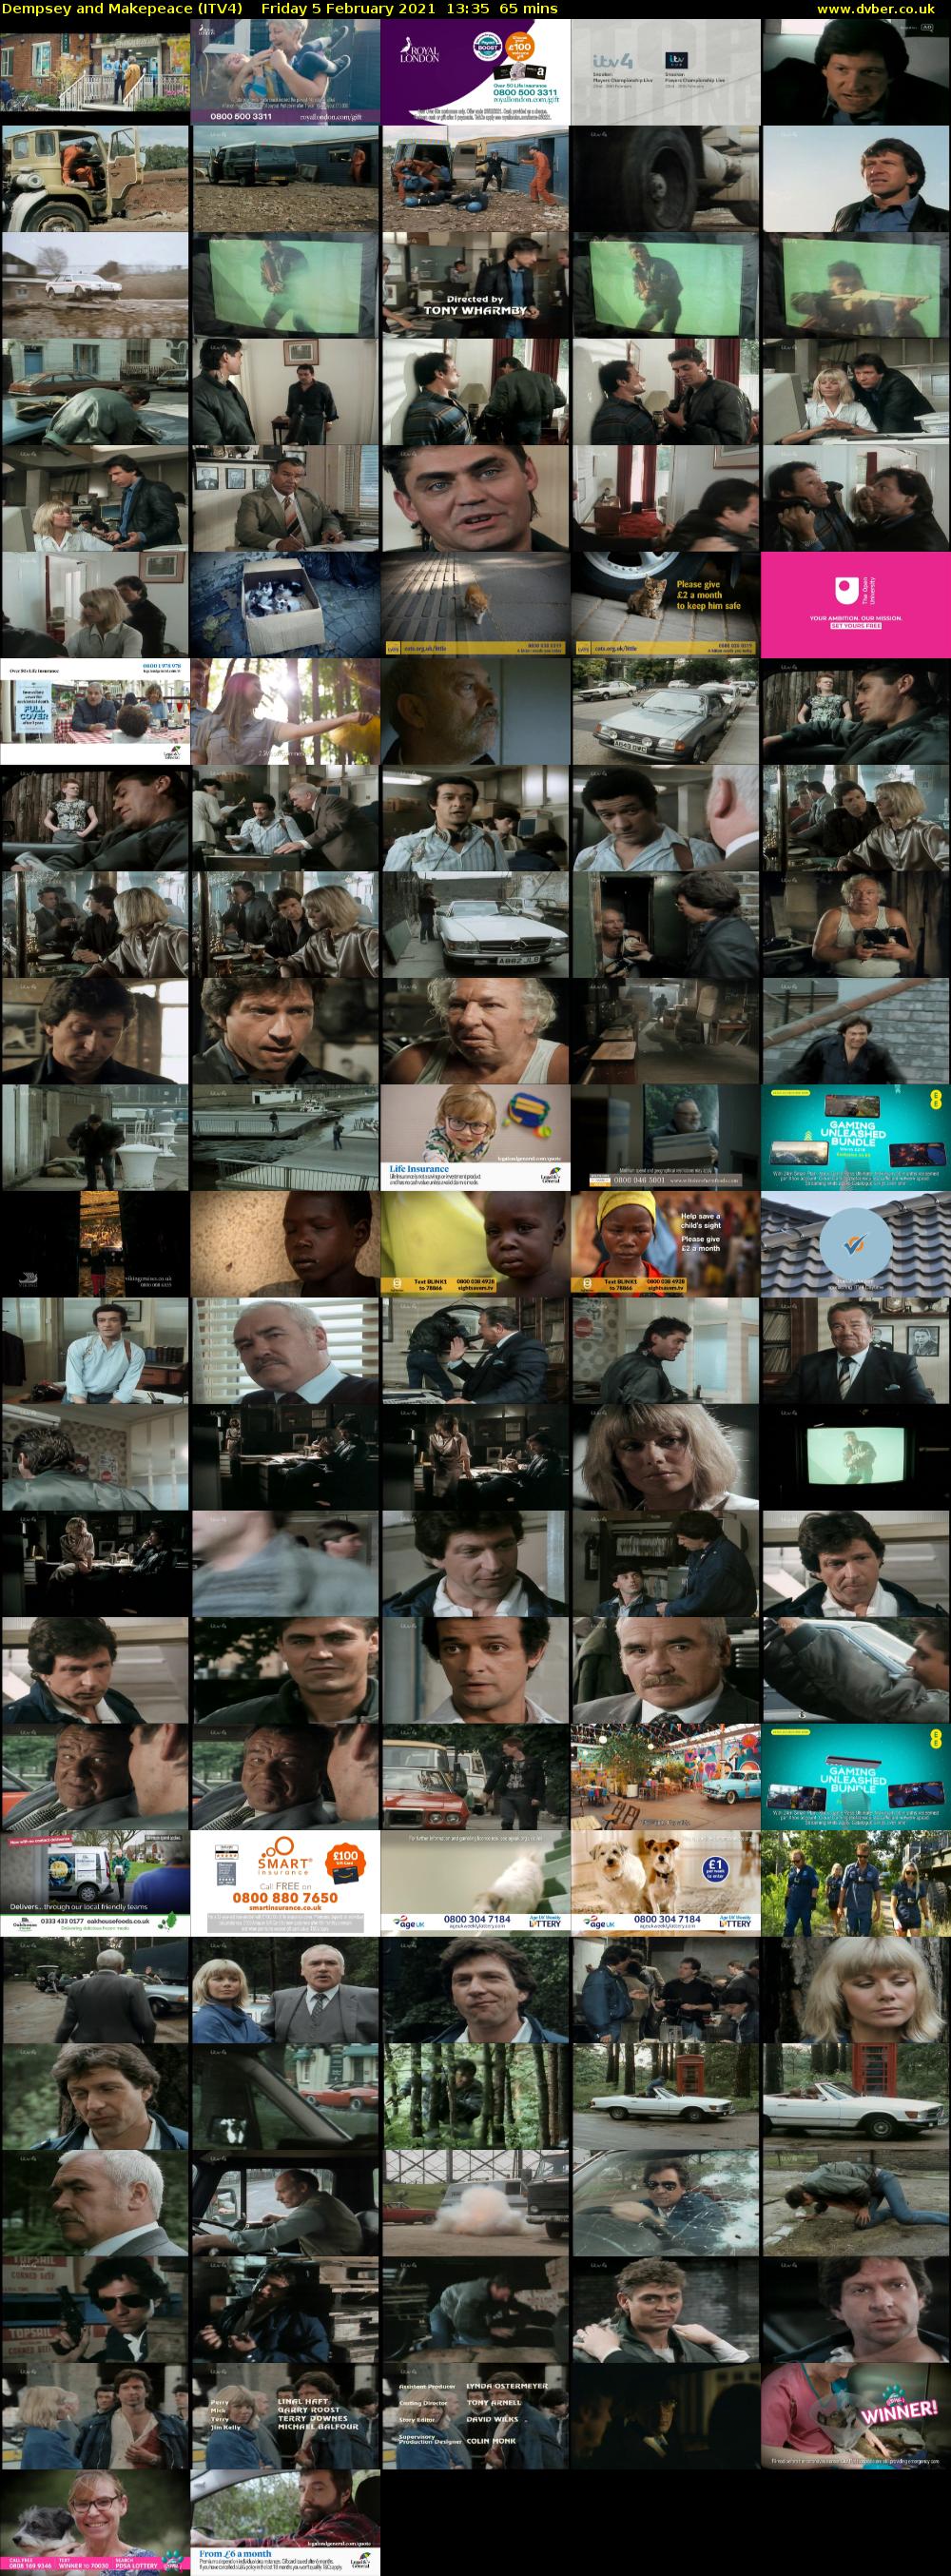 Dempsey and Makepeace (ITV4) Friday 5 February 2021 13:35 - 14:40